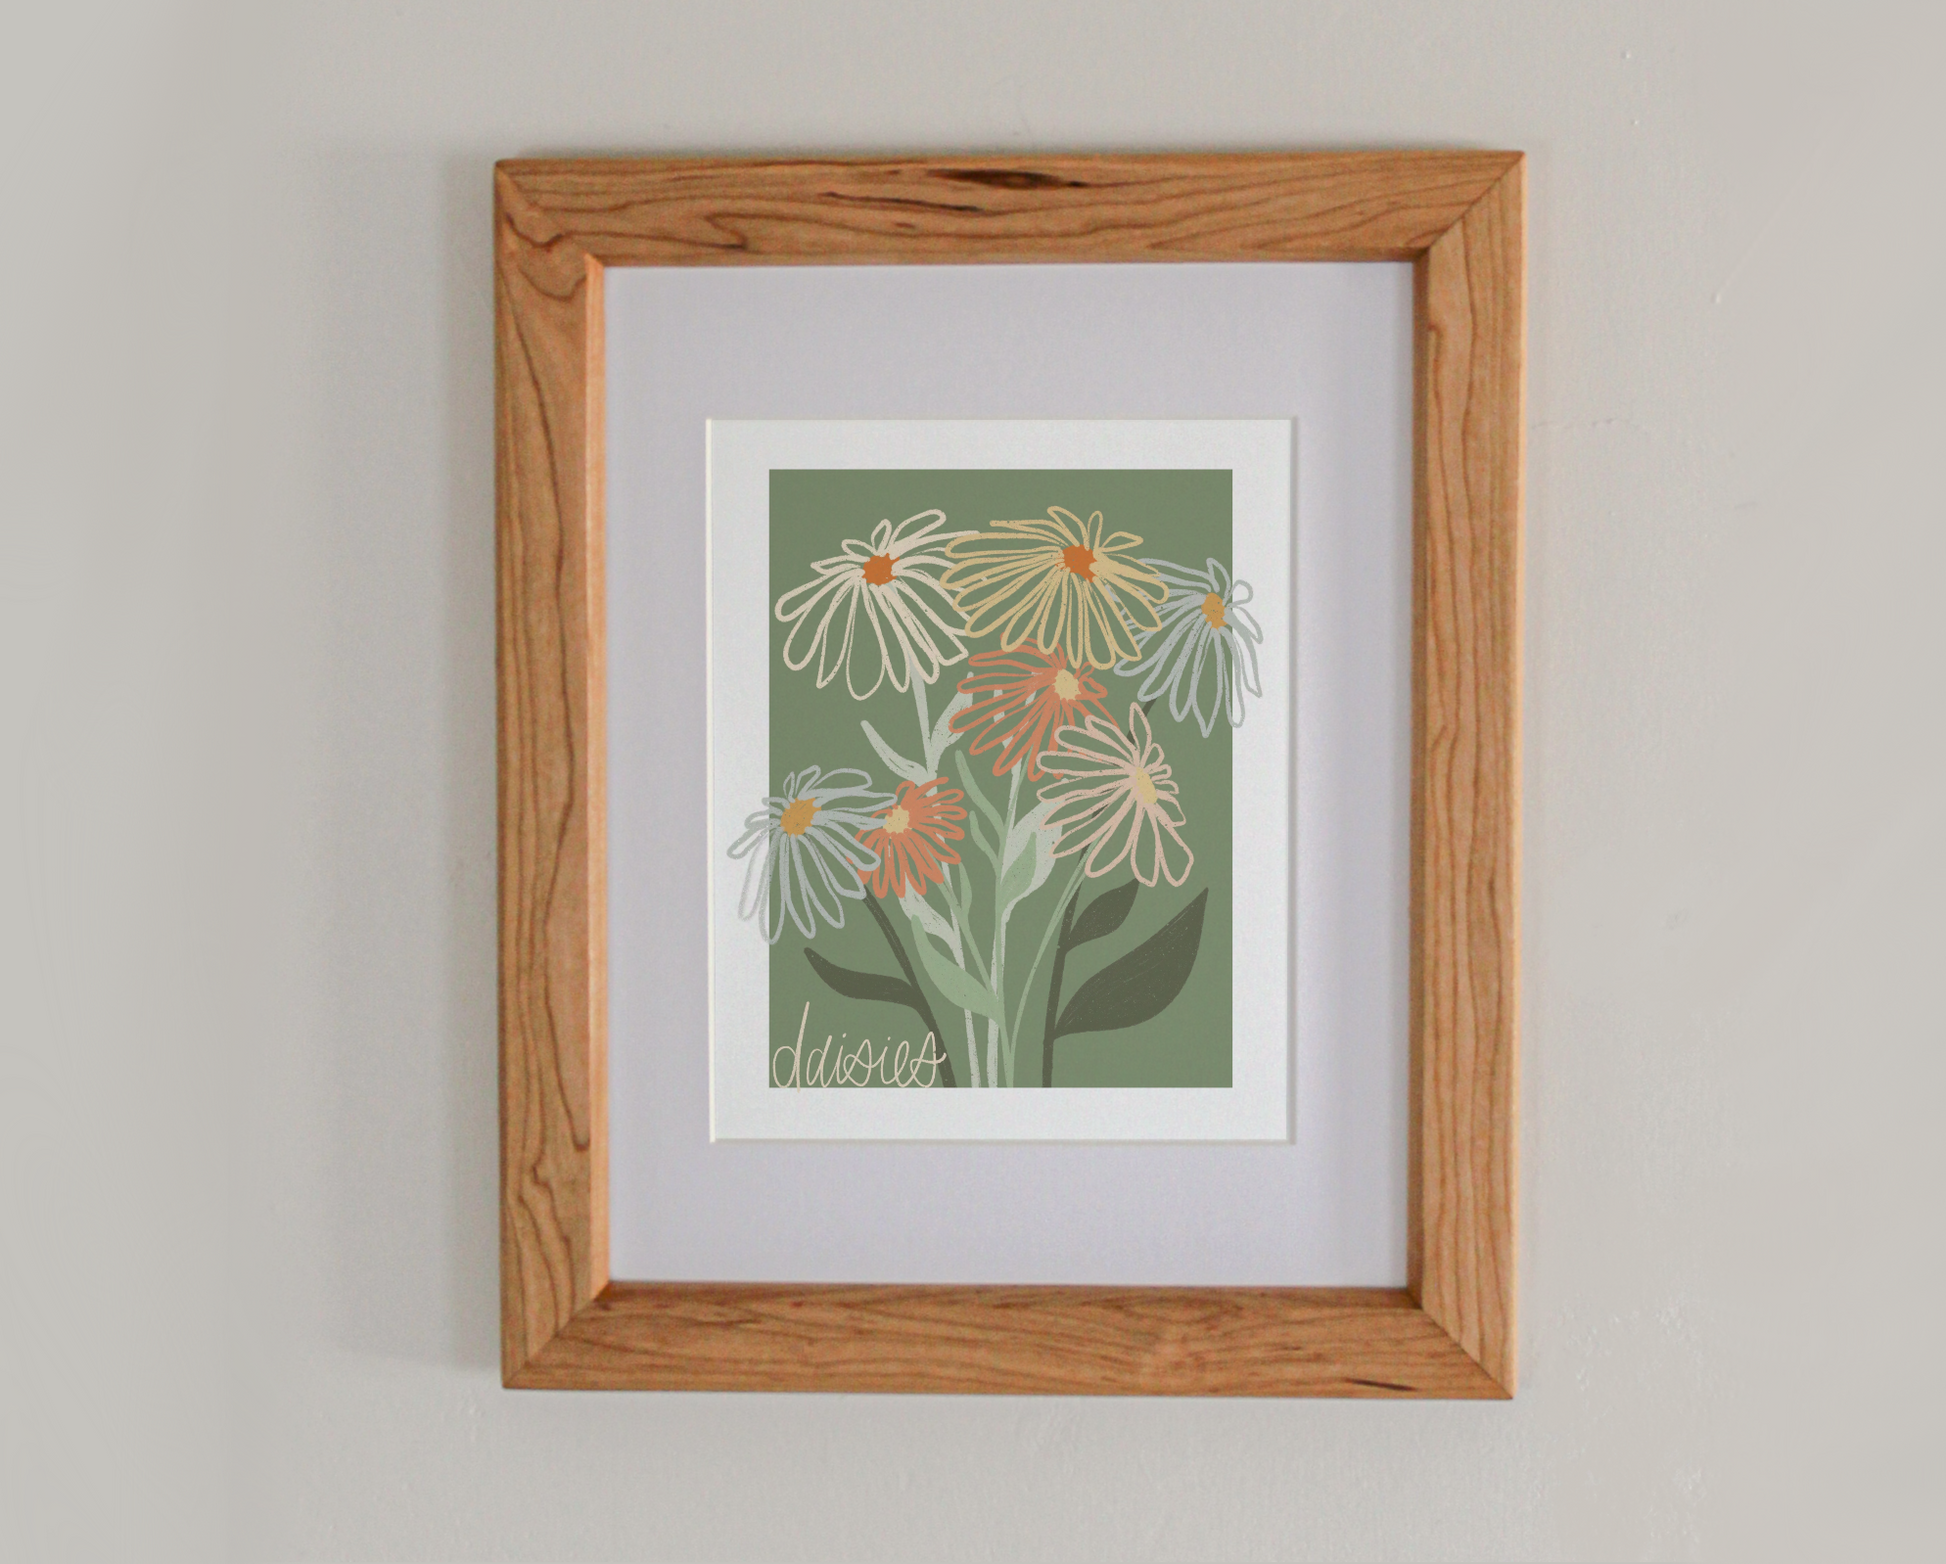 An art print line drawing of daisies in bloom in a cherry hardwood frame 